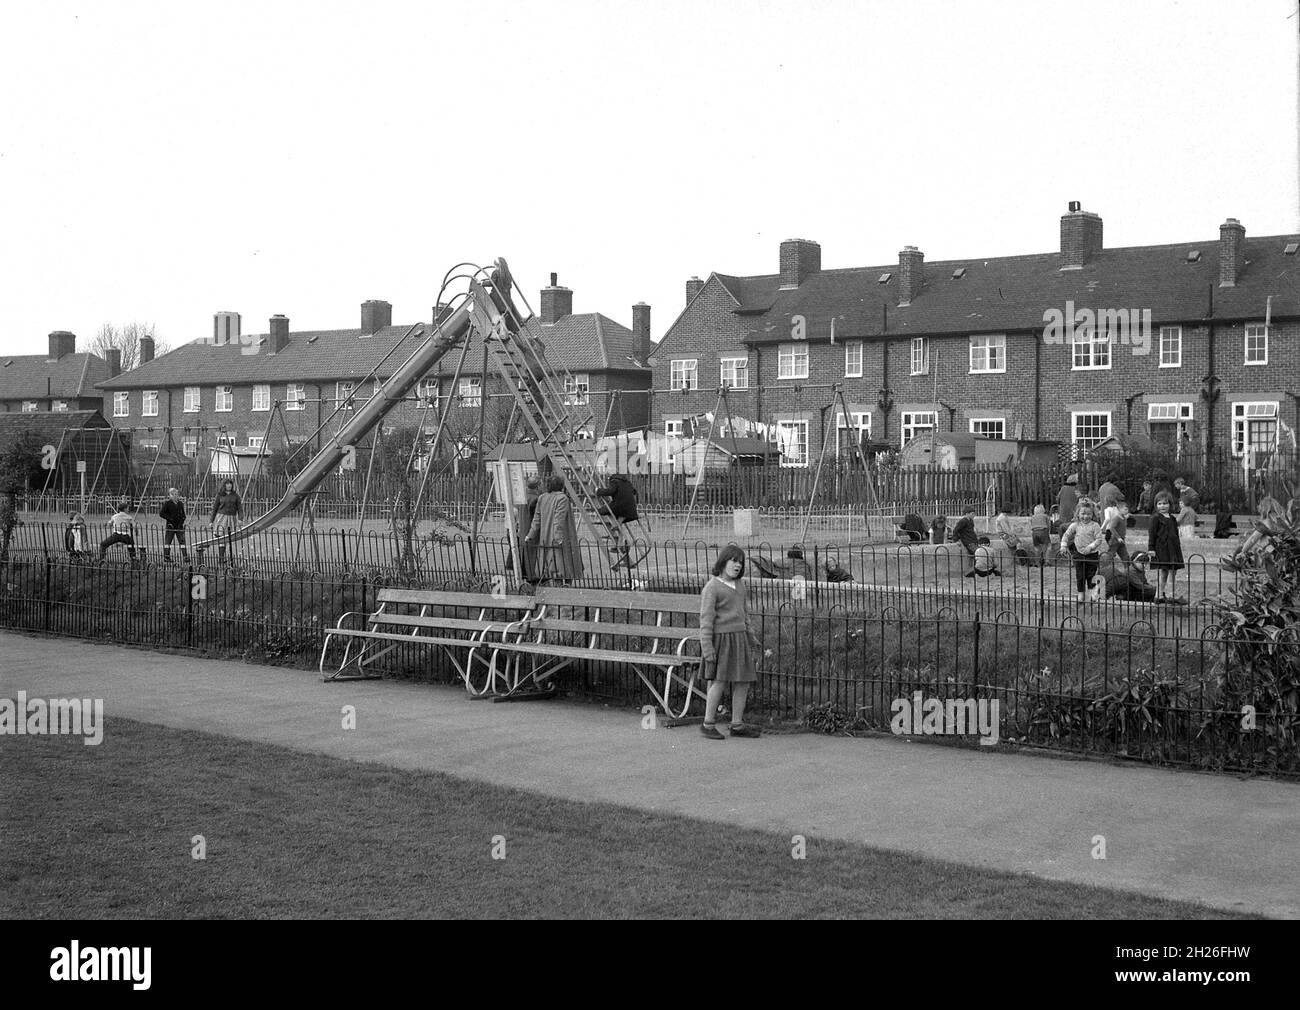 1950s, historical, in a public park, situated by a row of suburban council houses, England, UK, children playing in a traditional playground, with metal slide and sandpit. Stock Photo